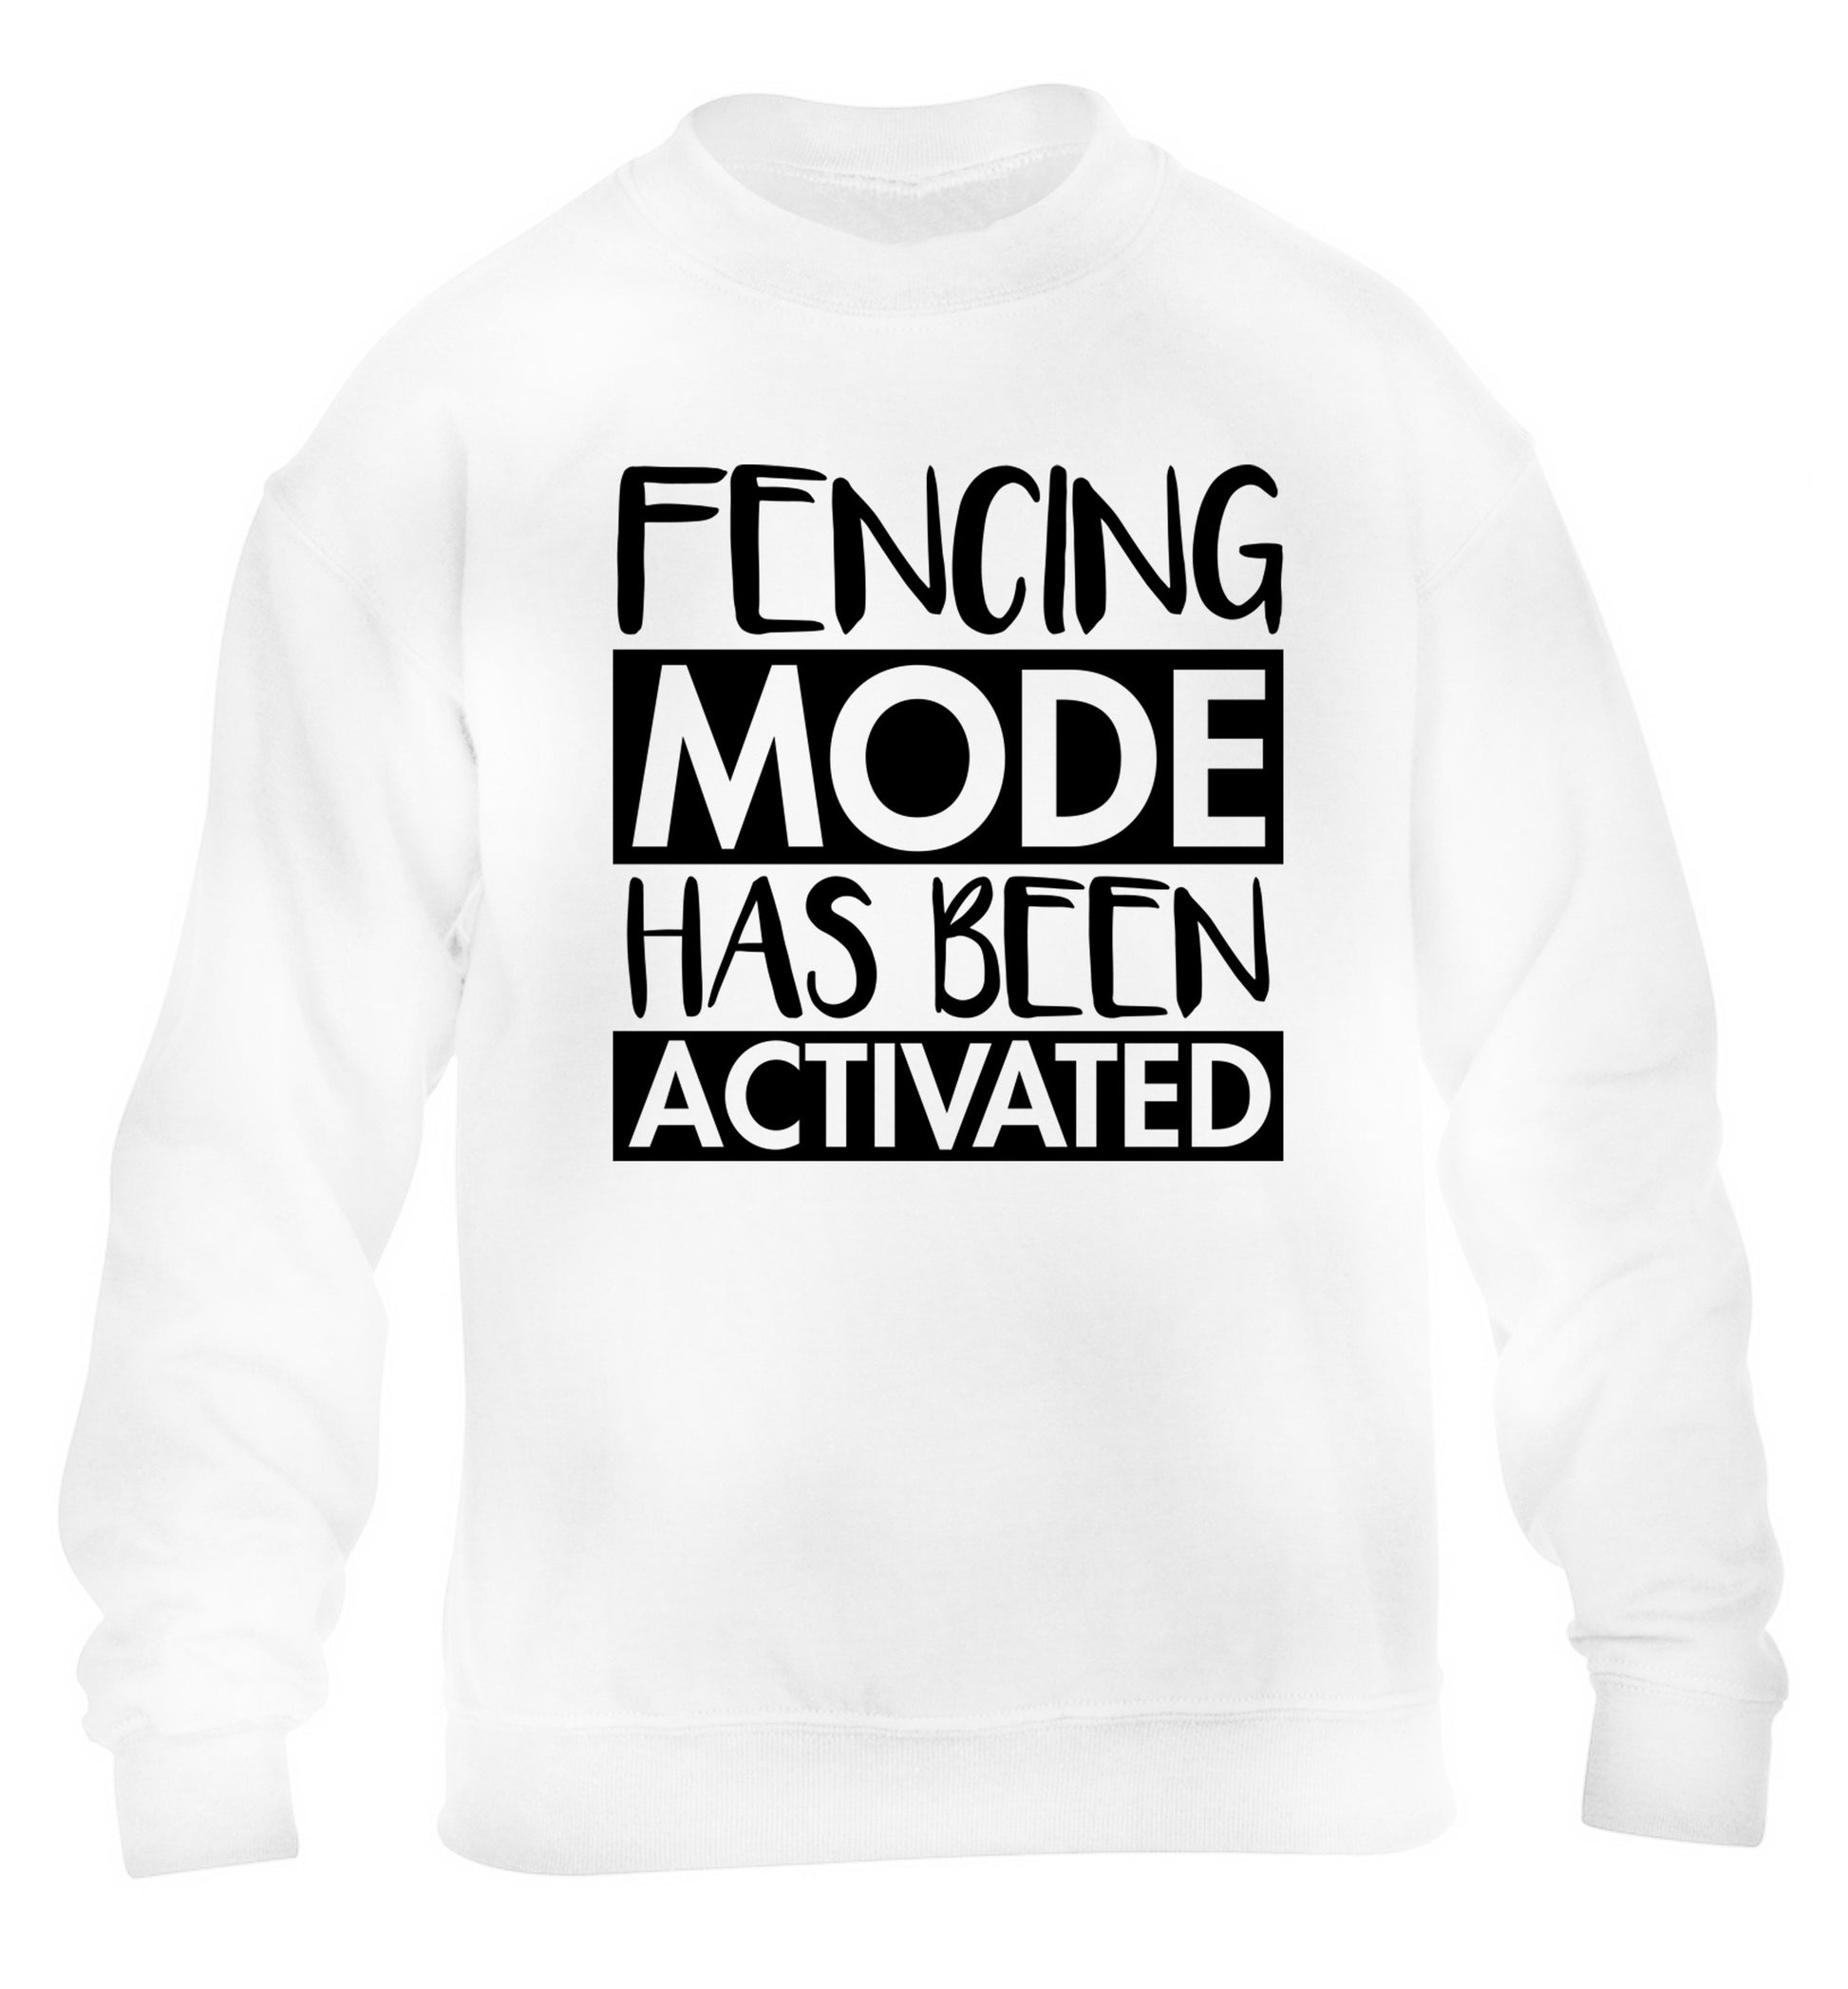 Fencing mode activated children's white sweater 12-14 Years